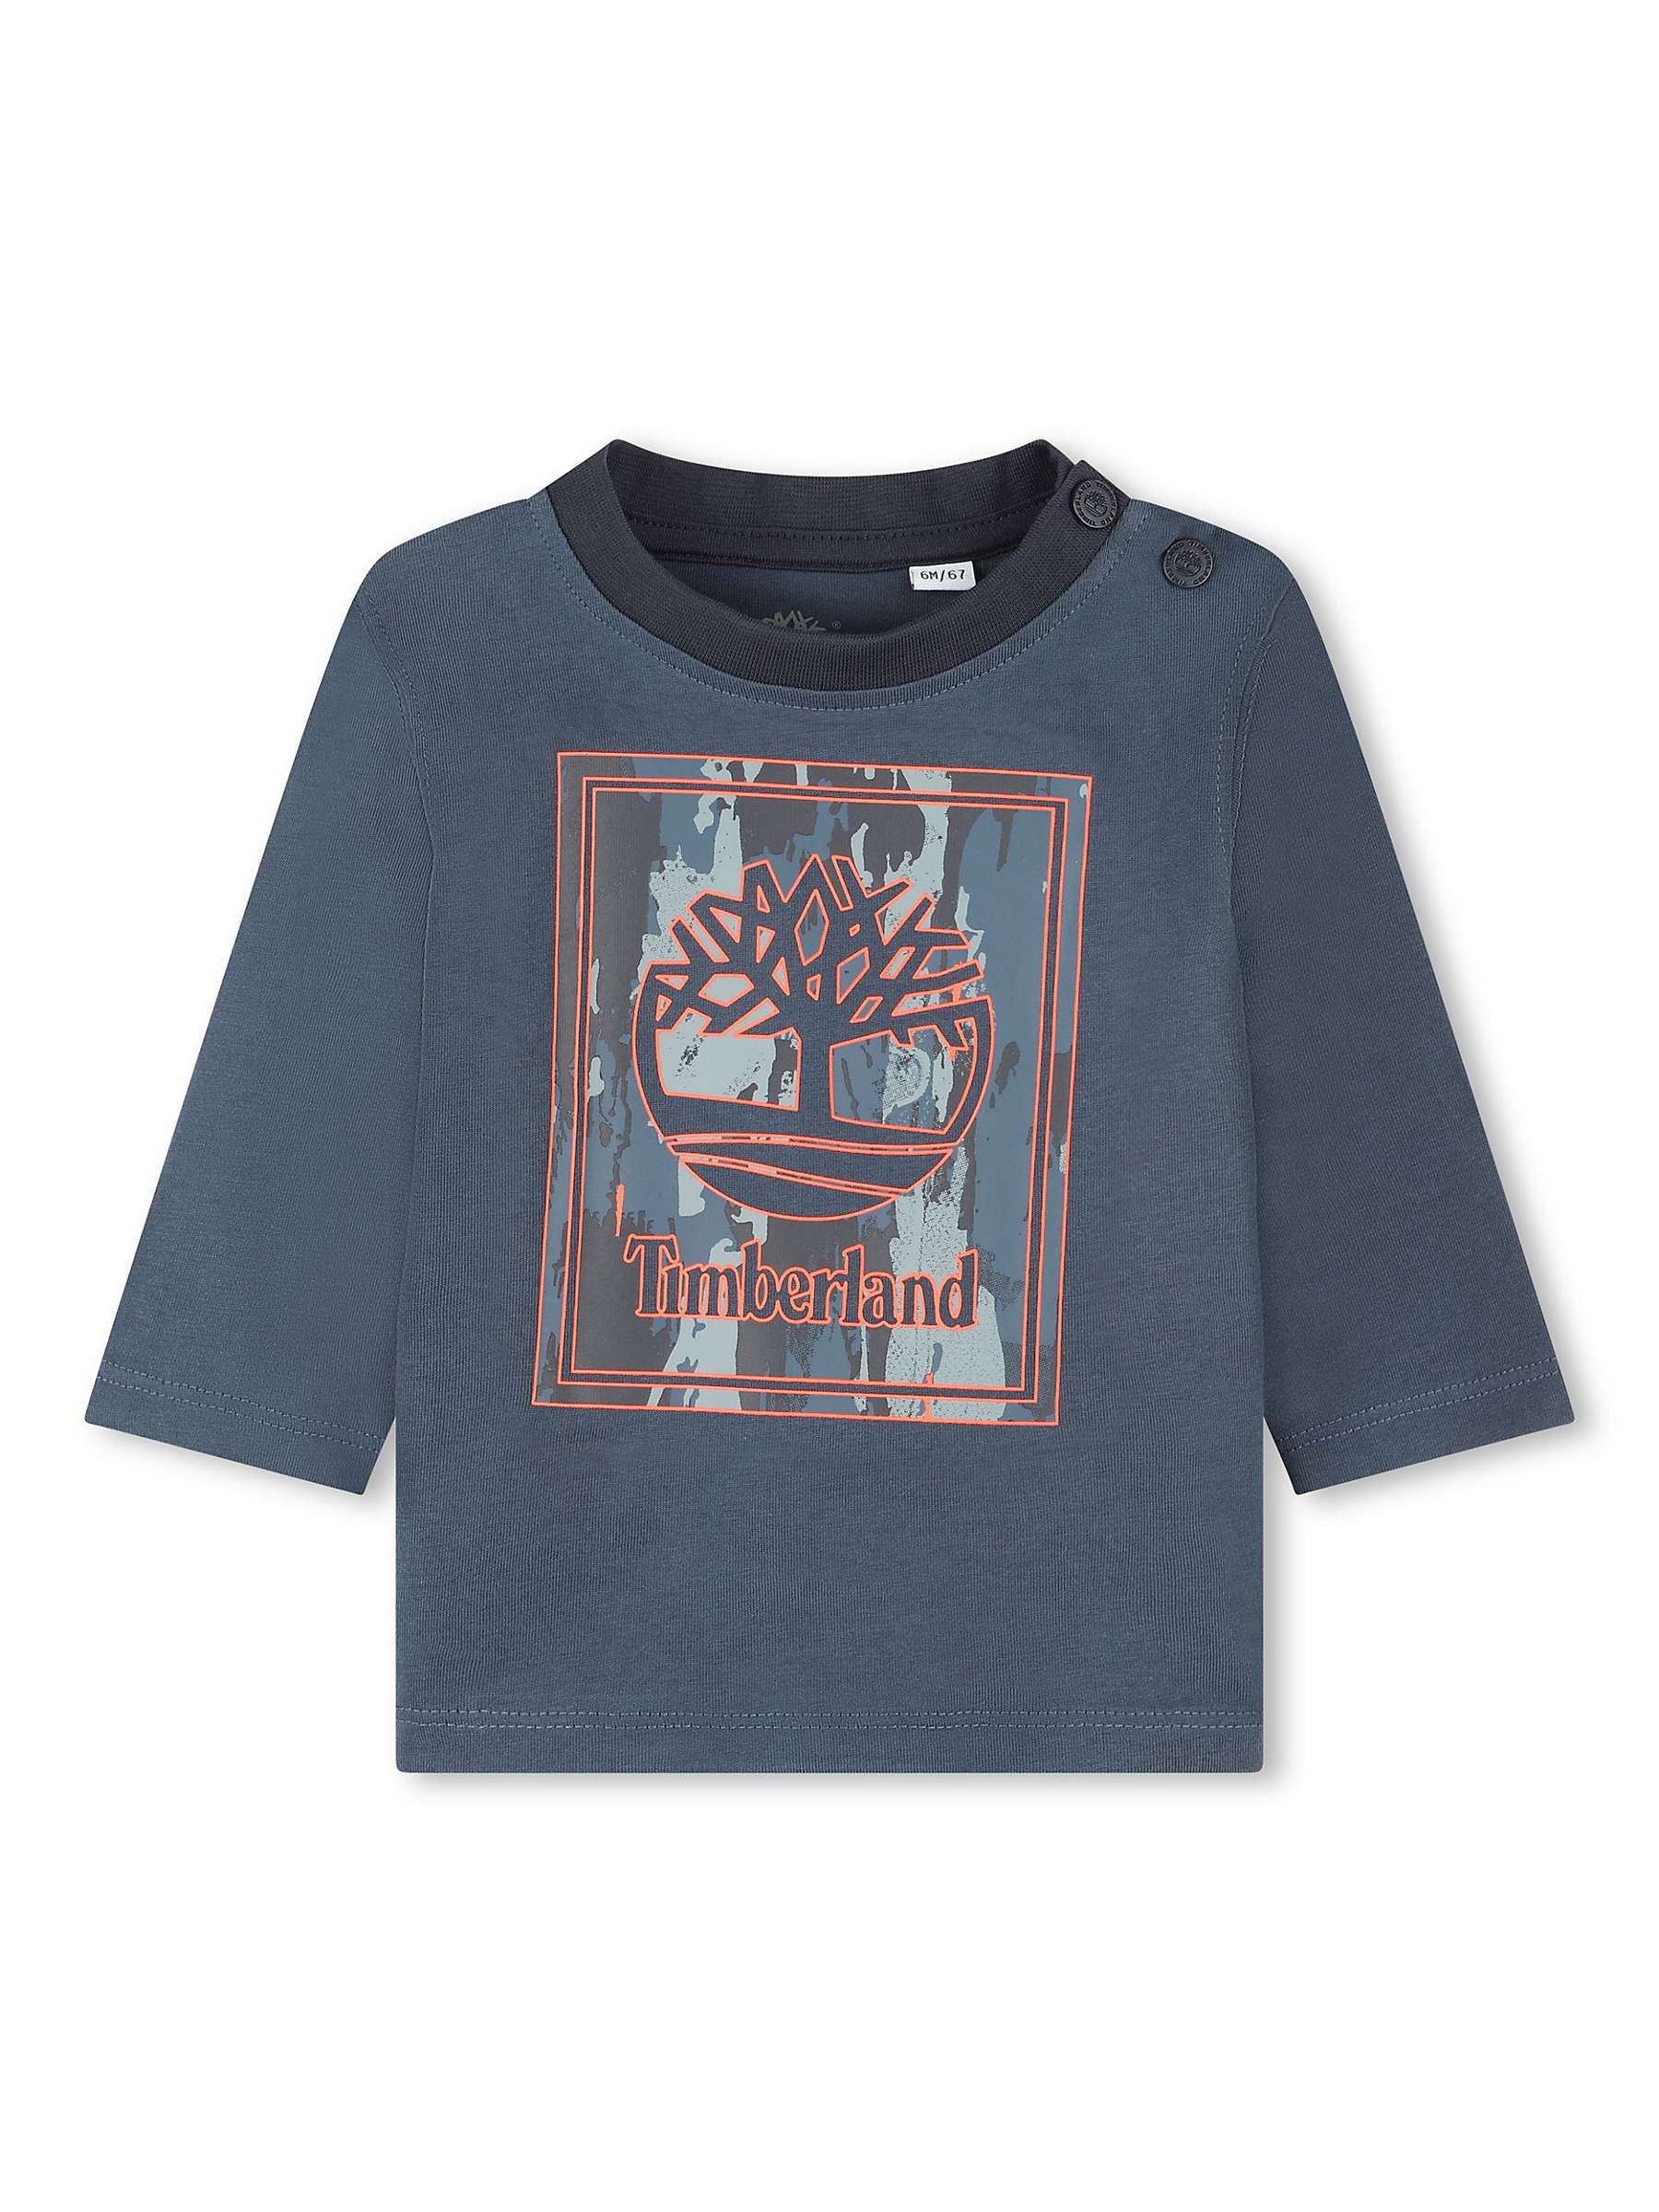 Buy Timberland Baby Graphic Logo Long Sleeve T-Shirt, Blue/Multi Online at johnlewis.com